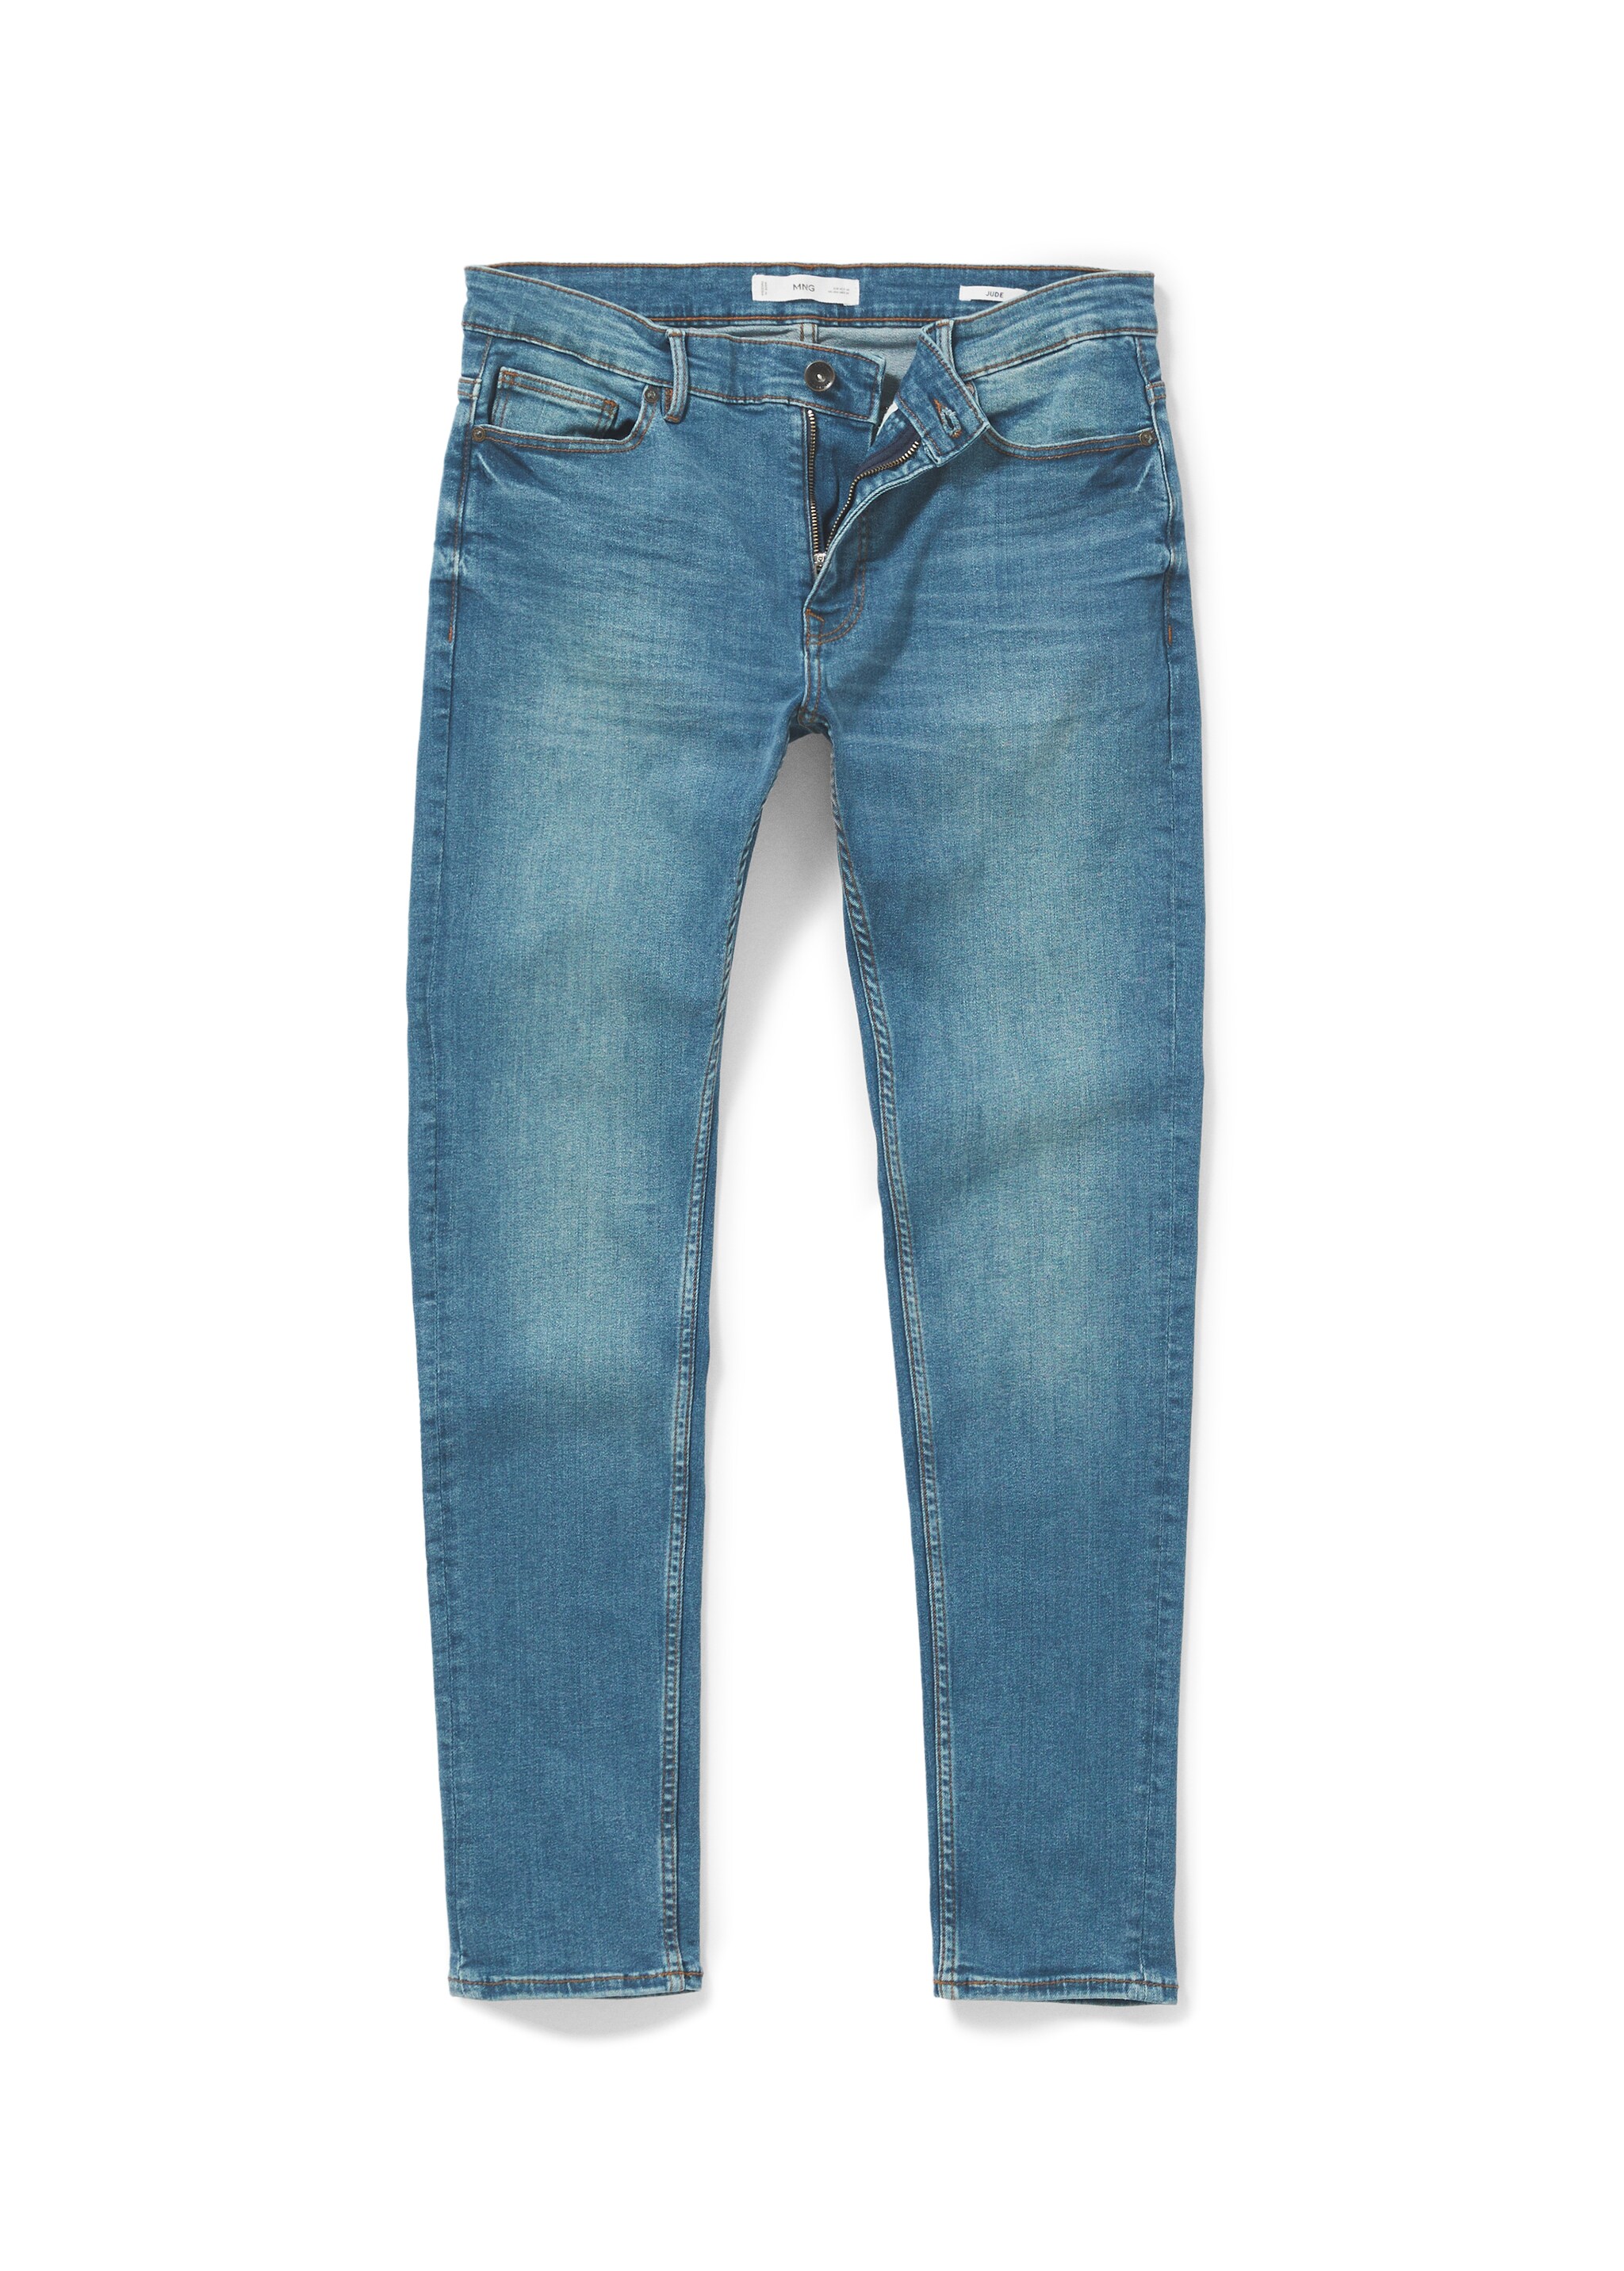 Jude skinny-fit jeans - Details of the article 9